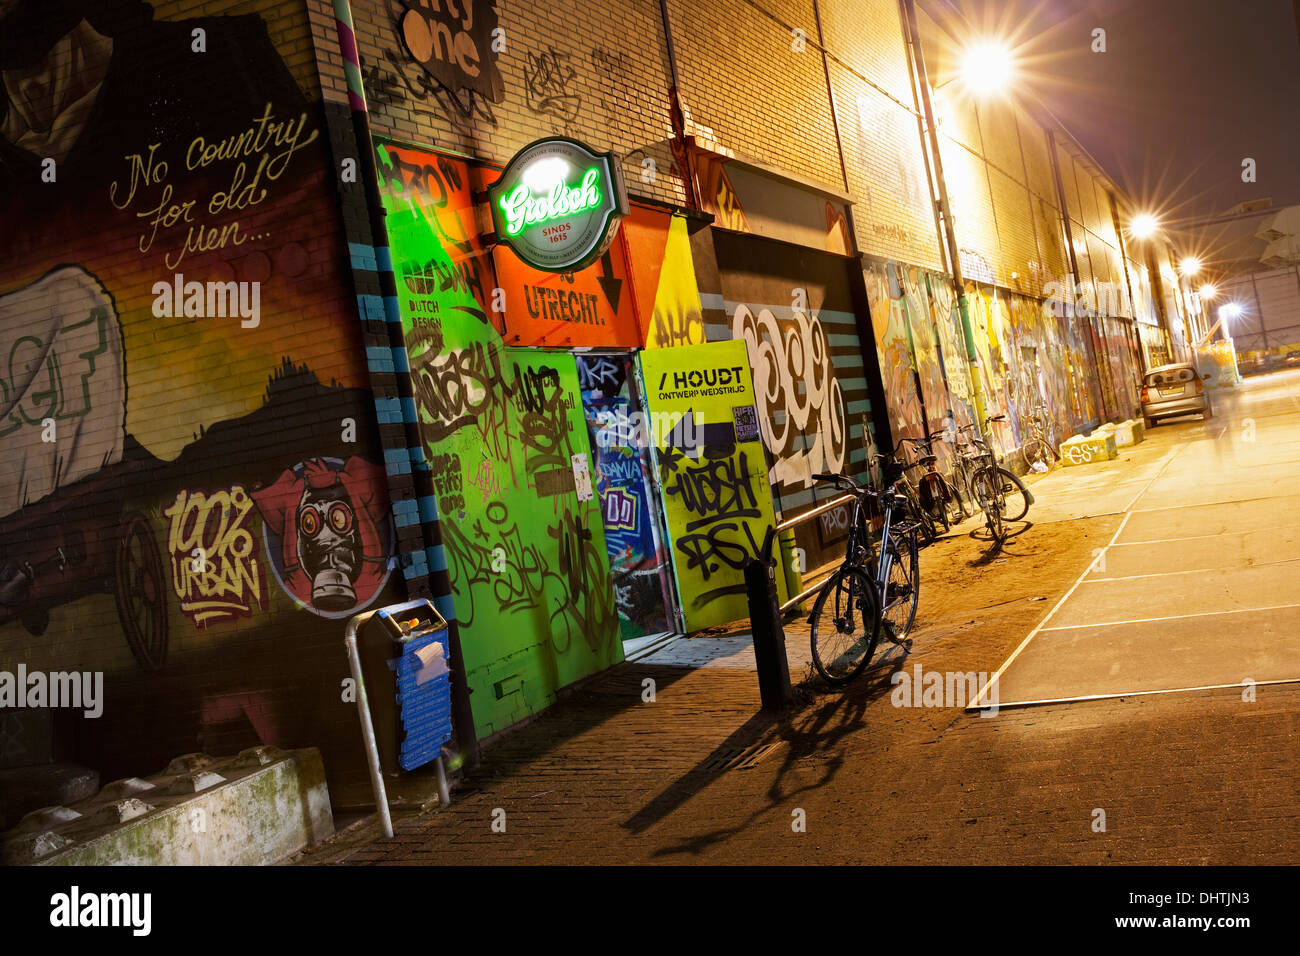 Netherlands, Eindhoven, District called Strijp-S. Entrance of Area Fifty One skatepark. Night Stock Photo